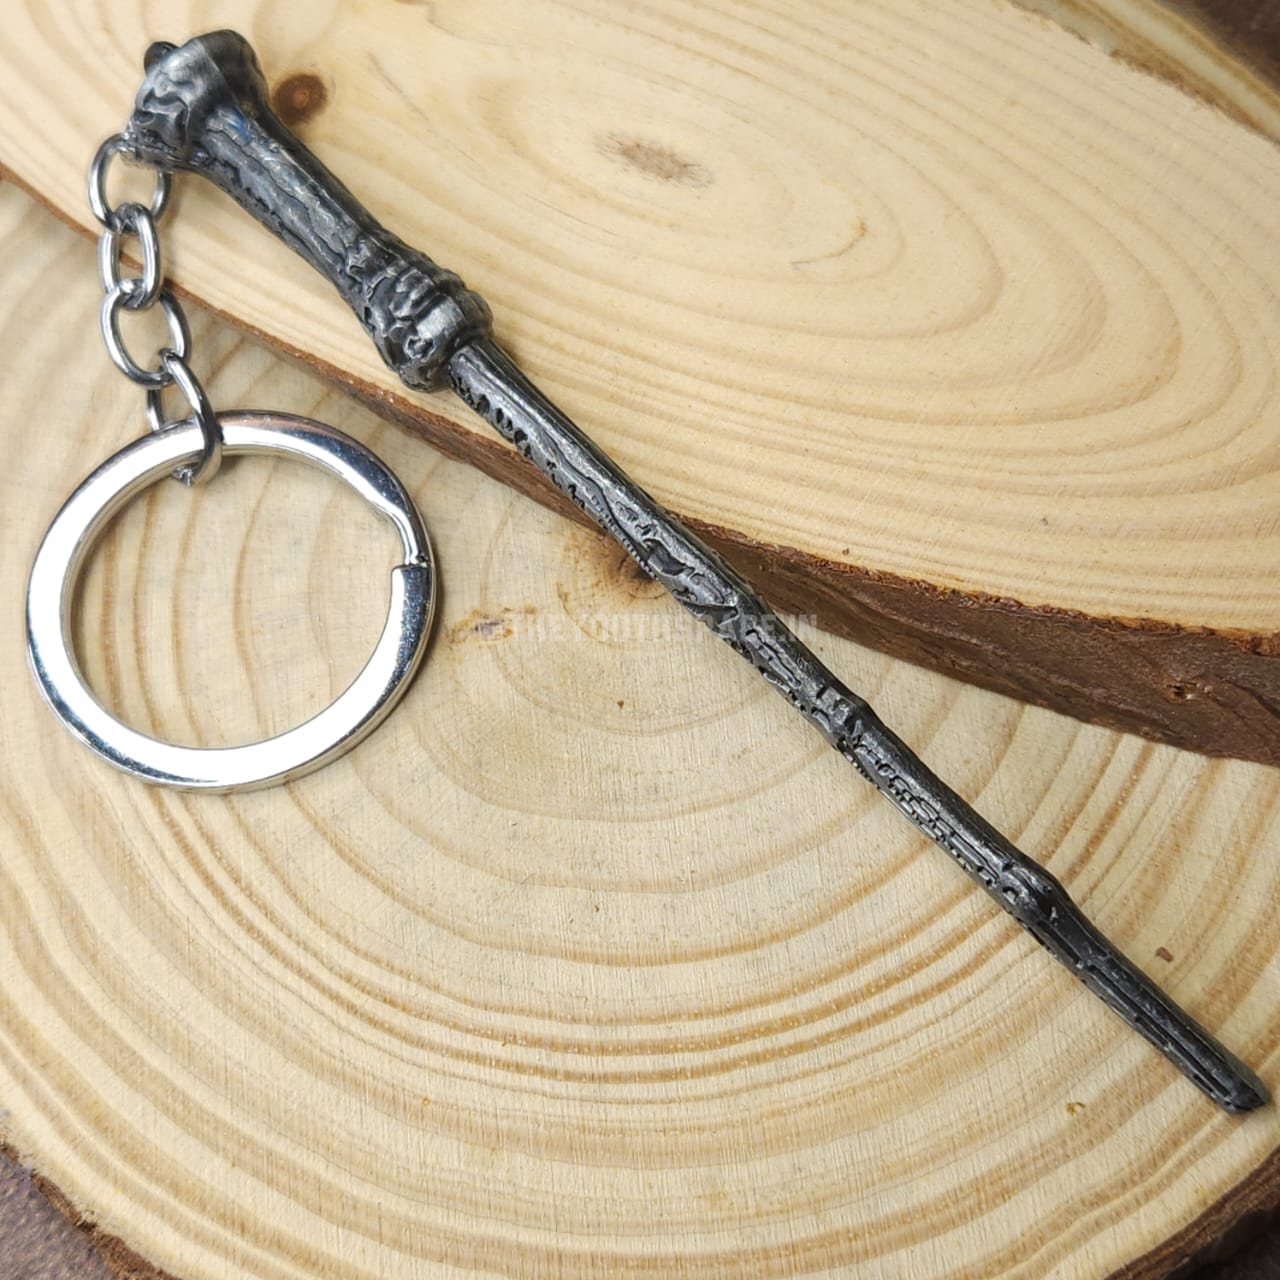 Harry Potter's Wand in metal keychain